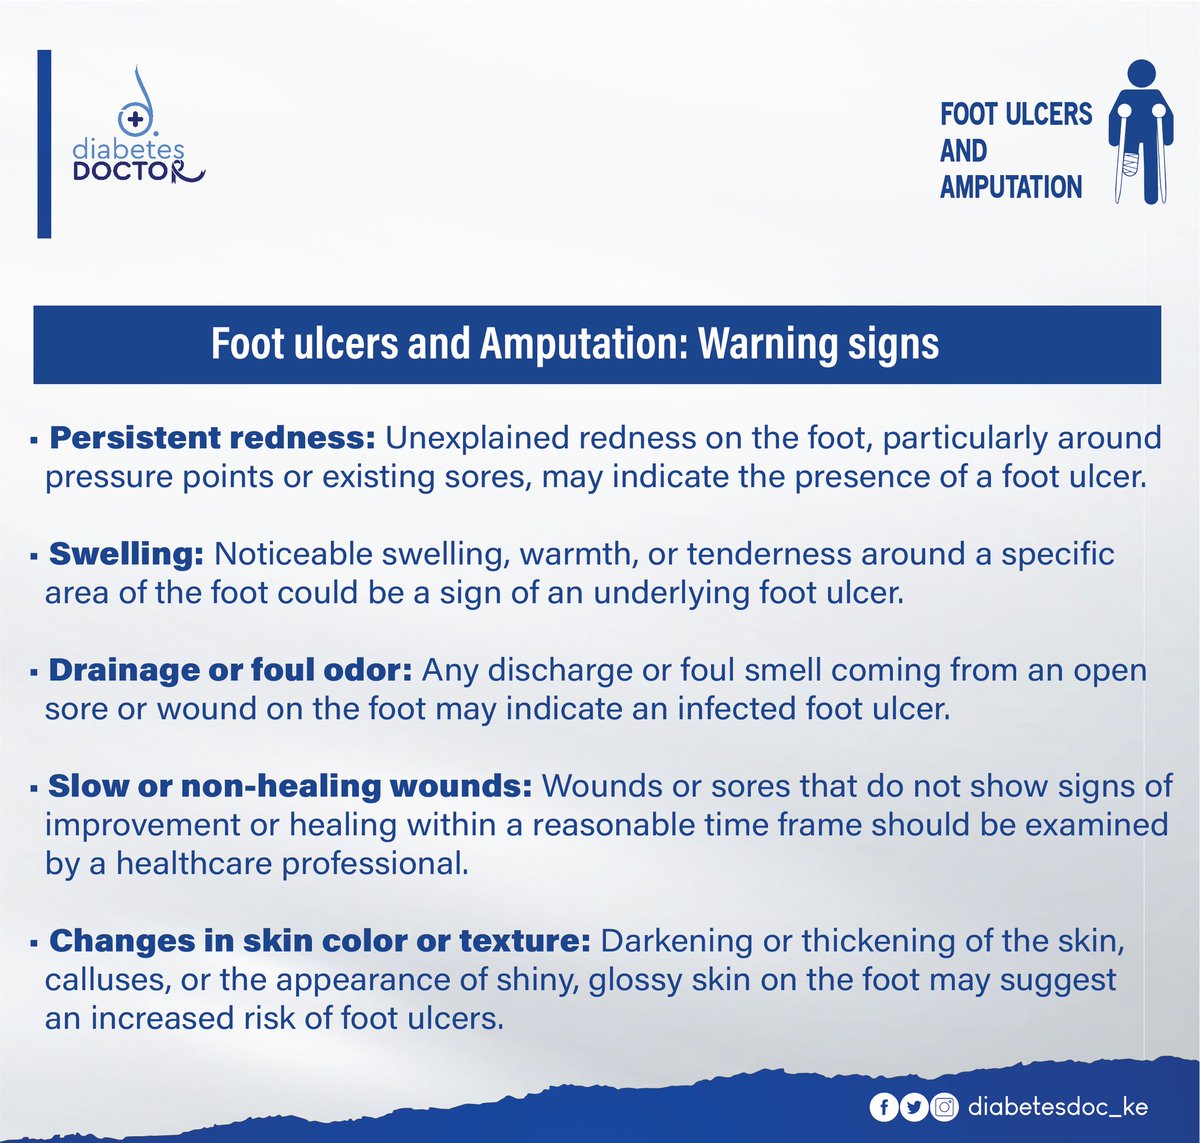 Don't underestimate the importance of identifying the risk factors and warning signs of foot ulcers and amputation in diabetes. Early intervention saves lives and limbs! Let's raise awareness together.#DiabetesComplications #AmputationRisk #FootHealth #DiabetesAwareness